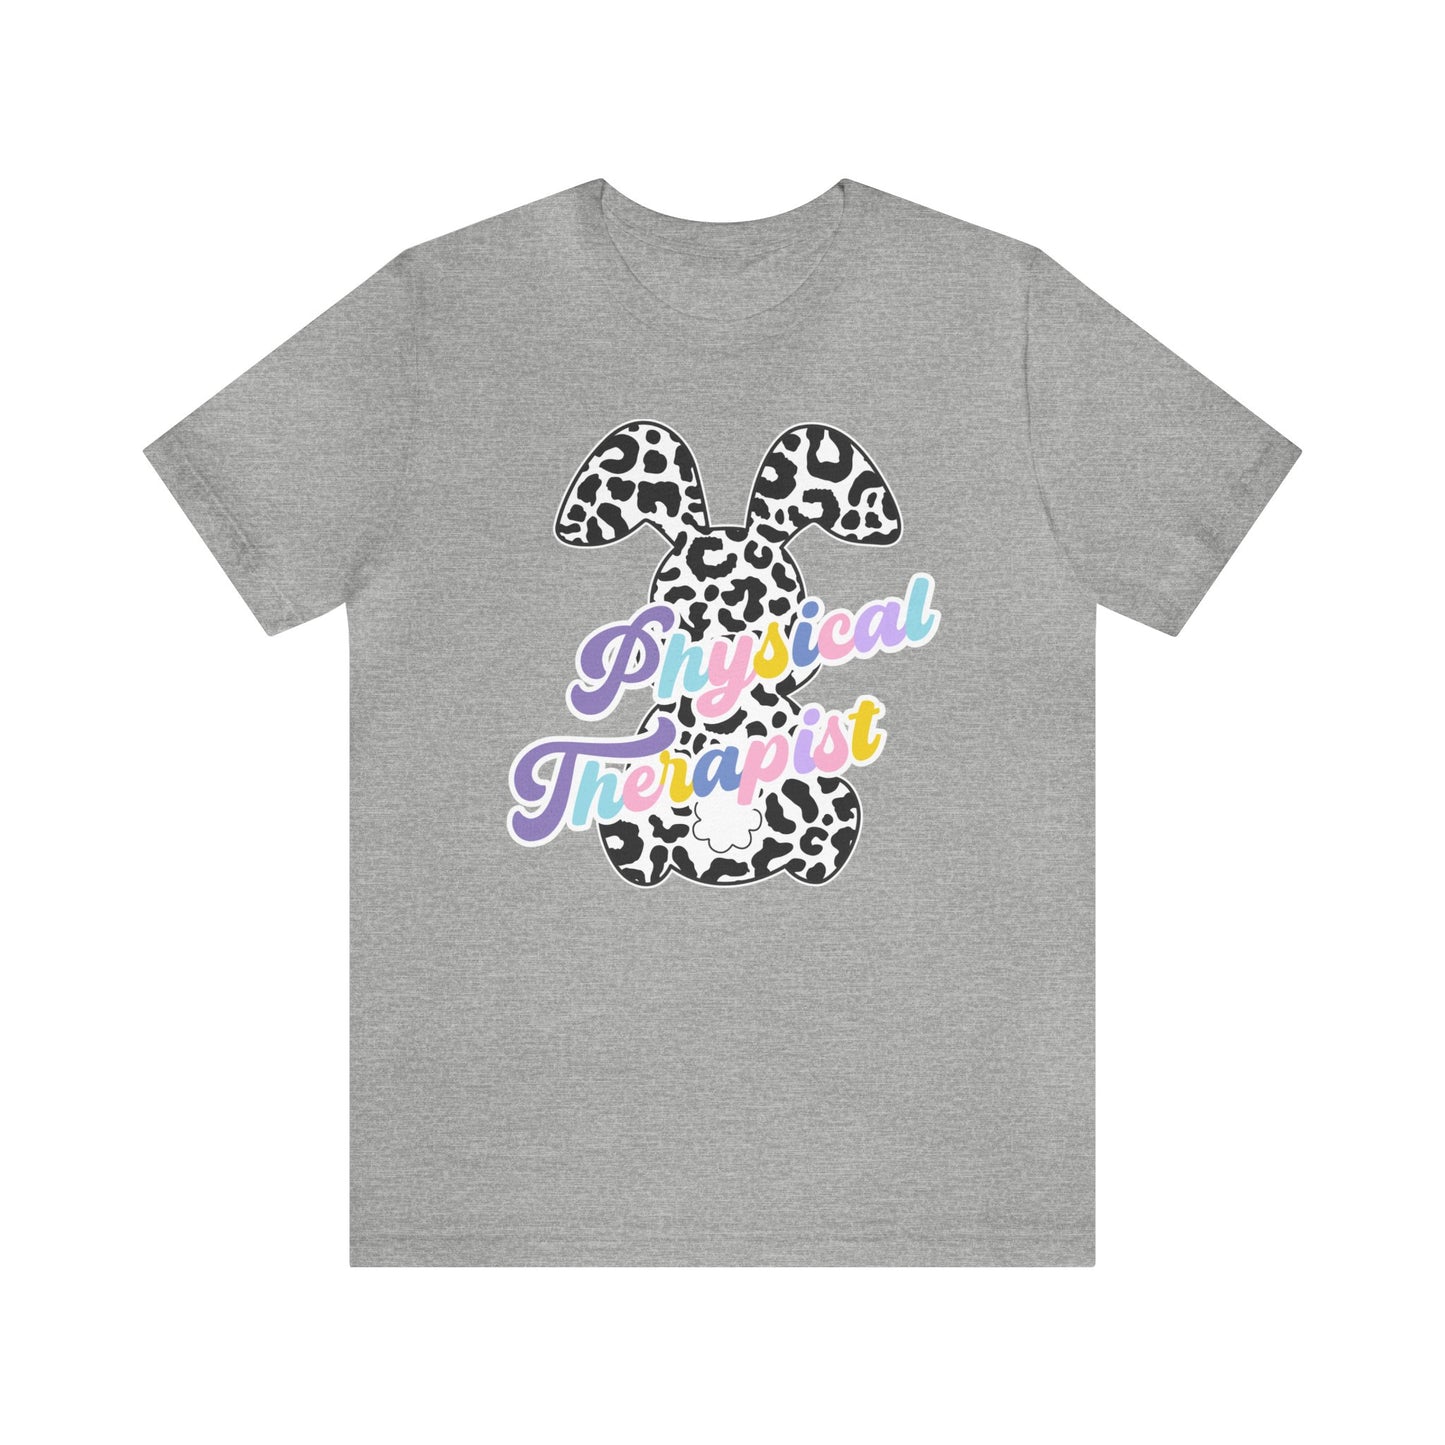 Happy Easter Physical Therapist Shirt, Easter Shirt, Bunny Shirt, Happy Easter Shirt, Easter Bunny Shirt, Therapist Shirt